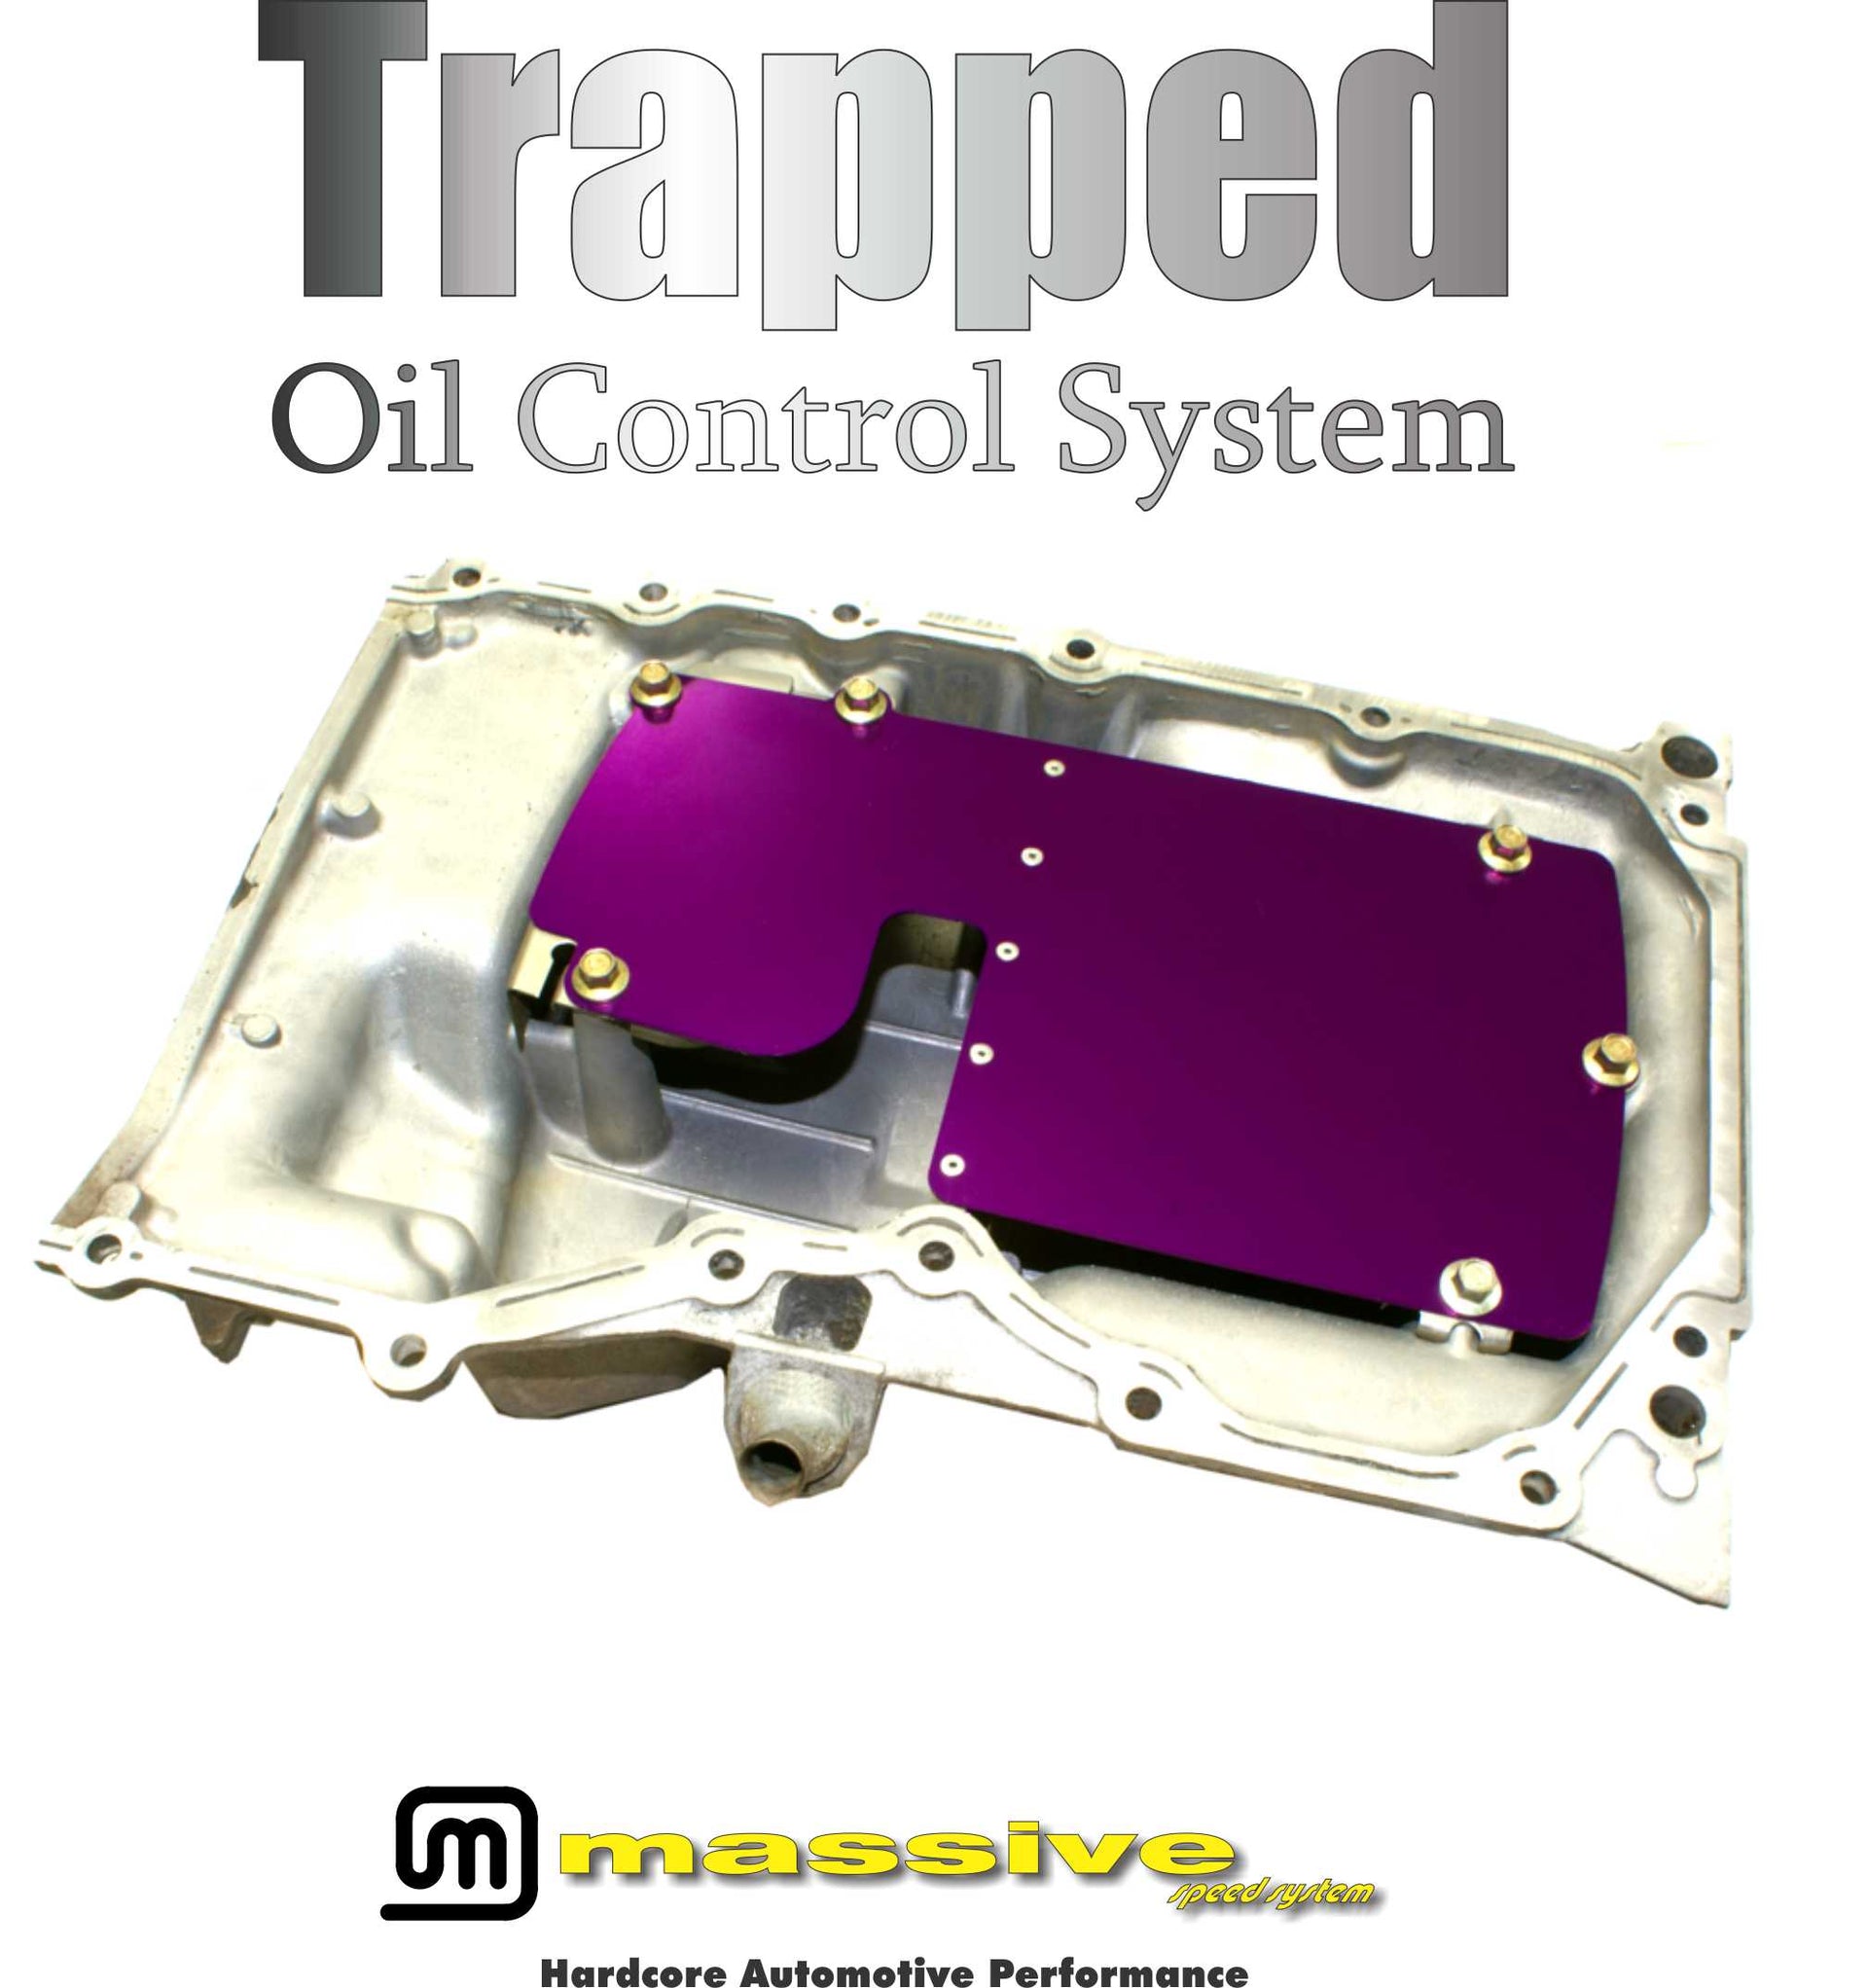 Massive Trapped Oil Control System Baffle Duratec / MZR Motor Fits in OEM Ford Focus 03-07 2.3 Pan Includes BSD - Massive Speed System